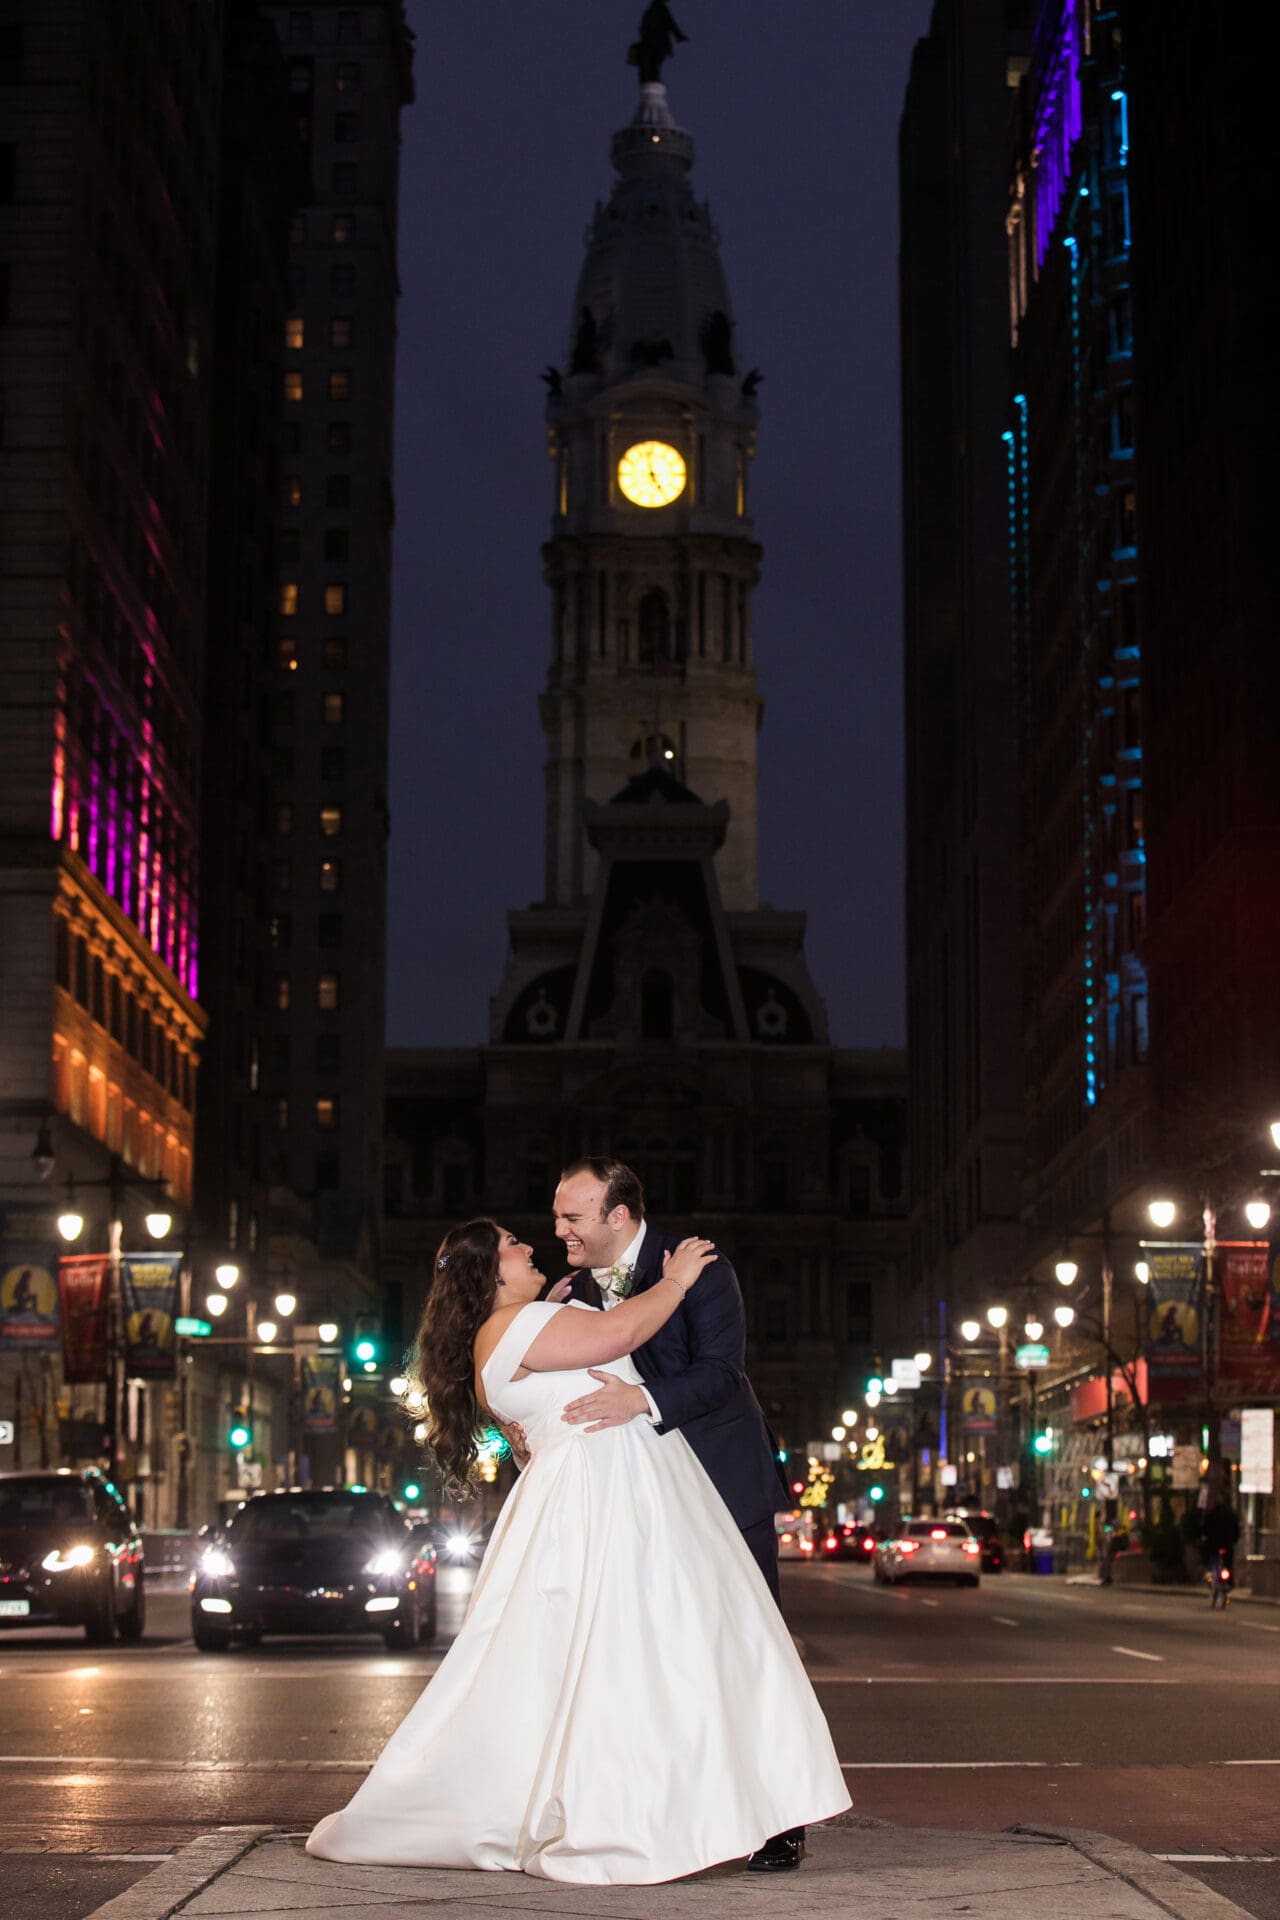 A groom holding a bride in the middle of the street on Broad Street in front of City Hall in Philadelphia